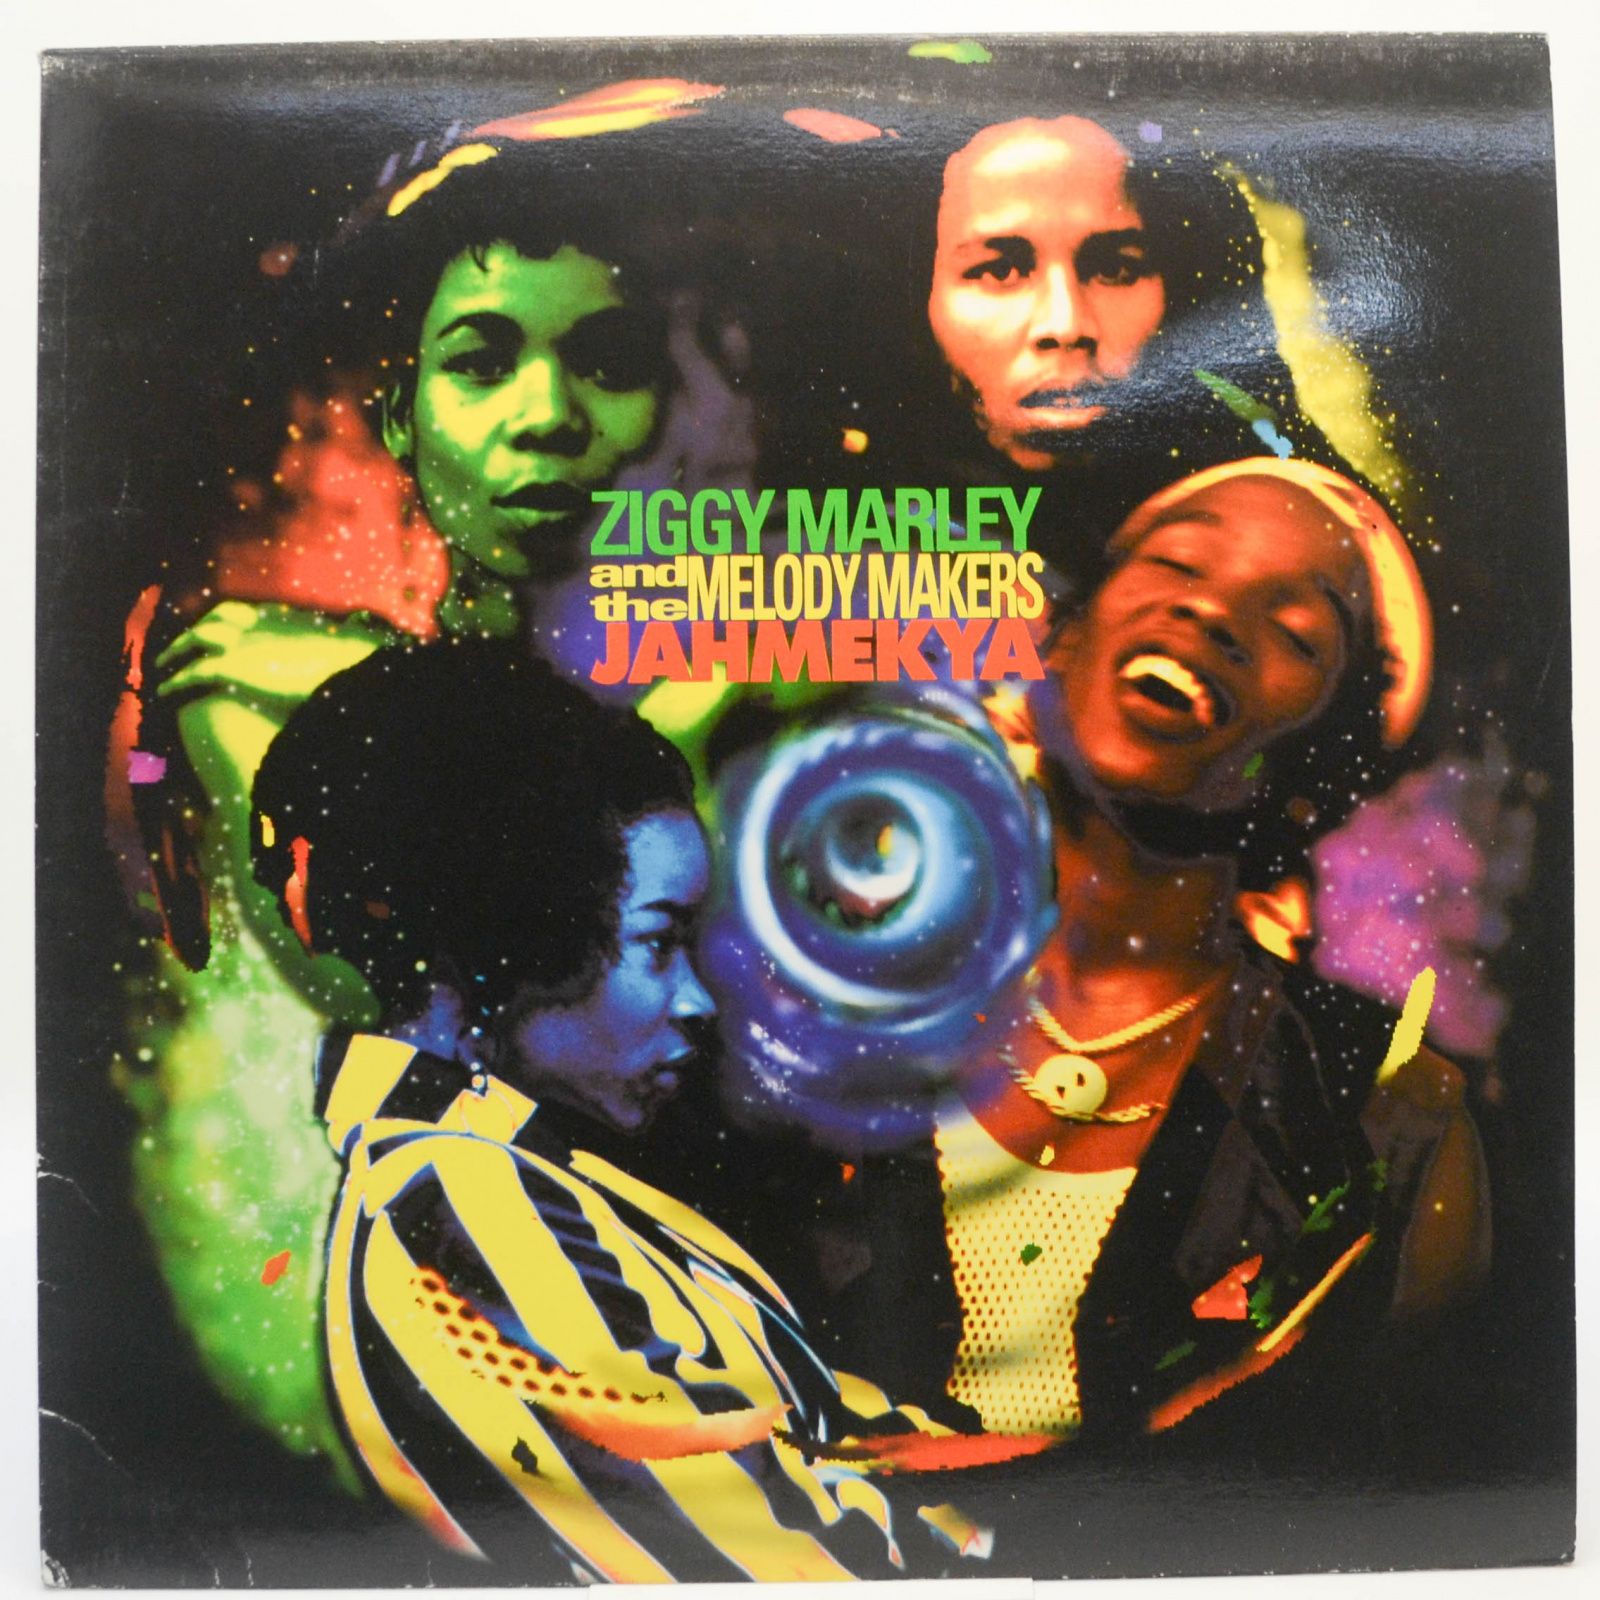 Ziggy Marley And The Melody Makers — Jahmekya, 1991